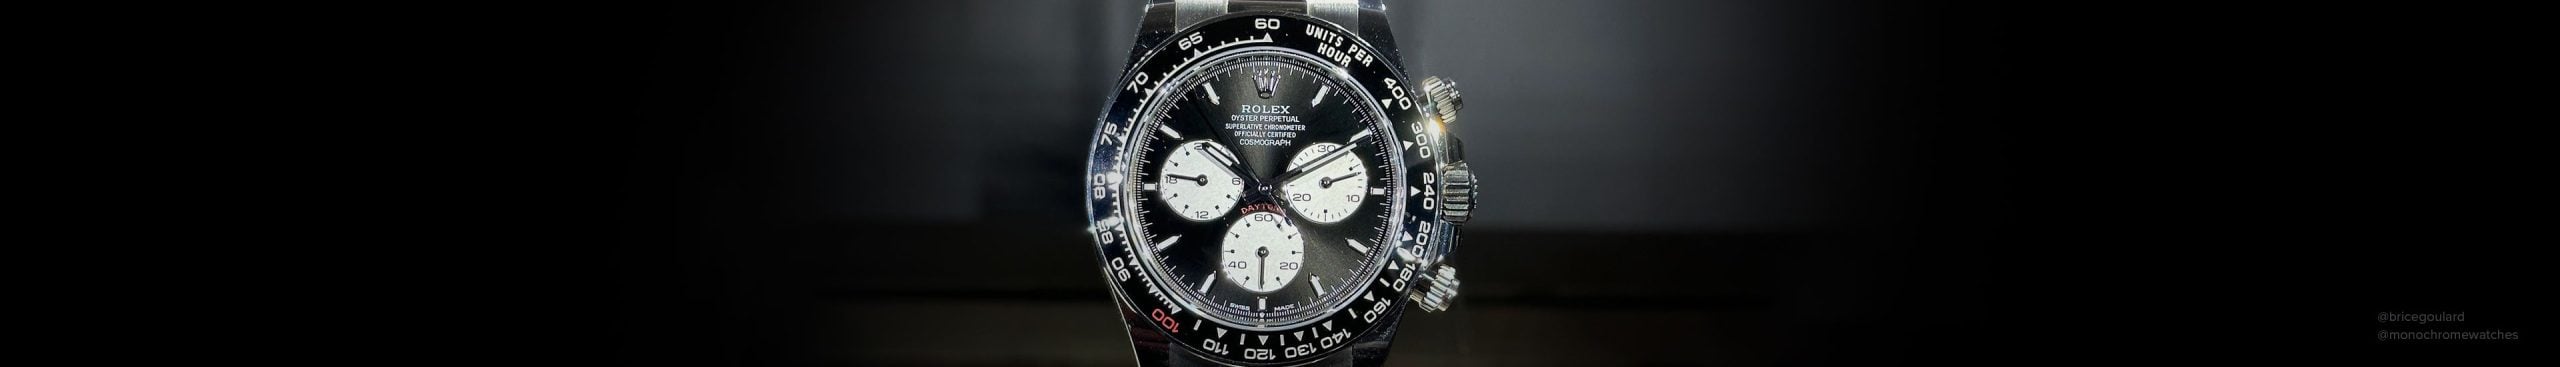 Rolex Daytona Le Mans Anniversary Edition Released: Reference 126529LN